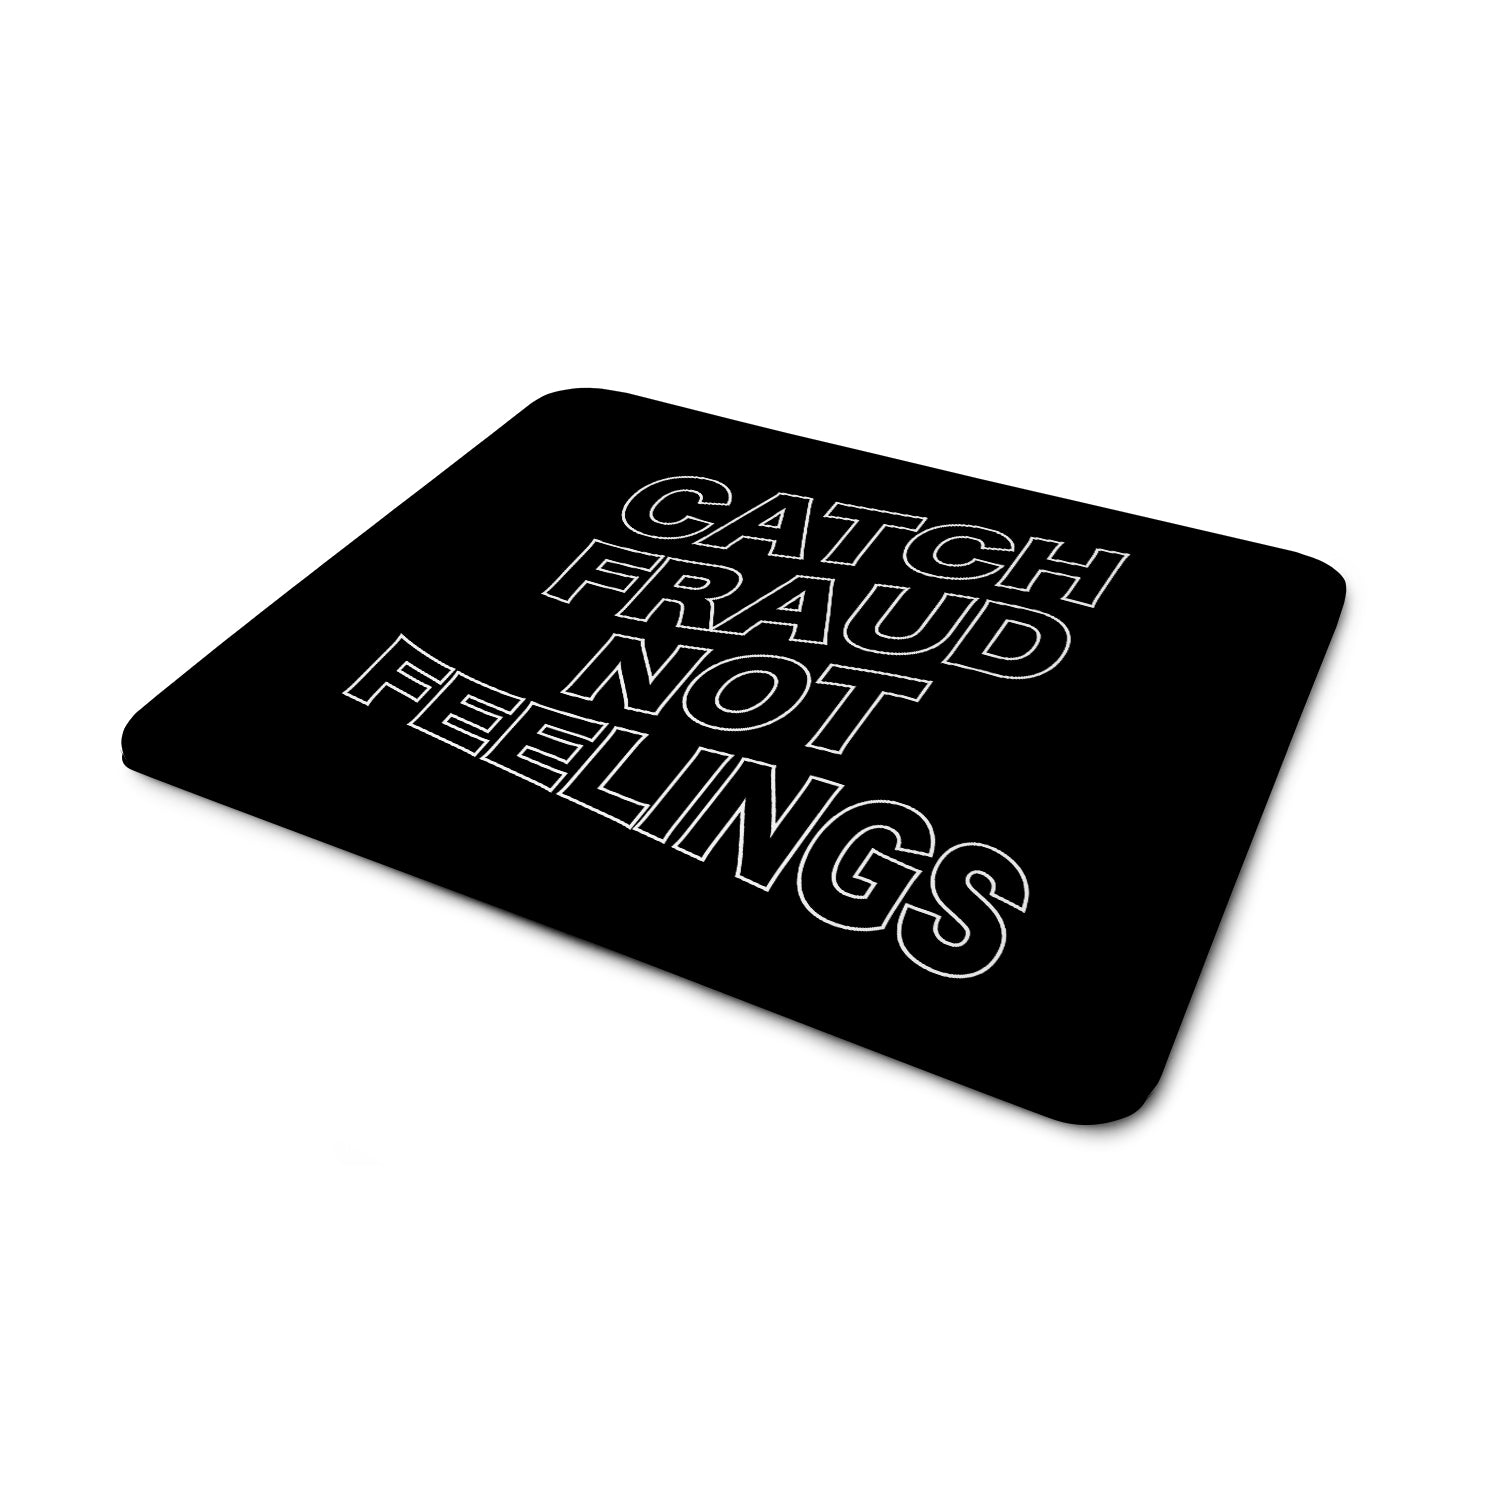 Catch Fraud Not Feelings Mouse Pad